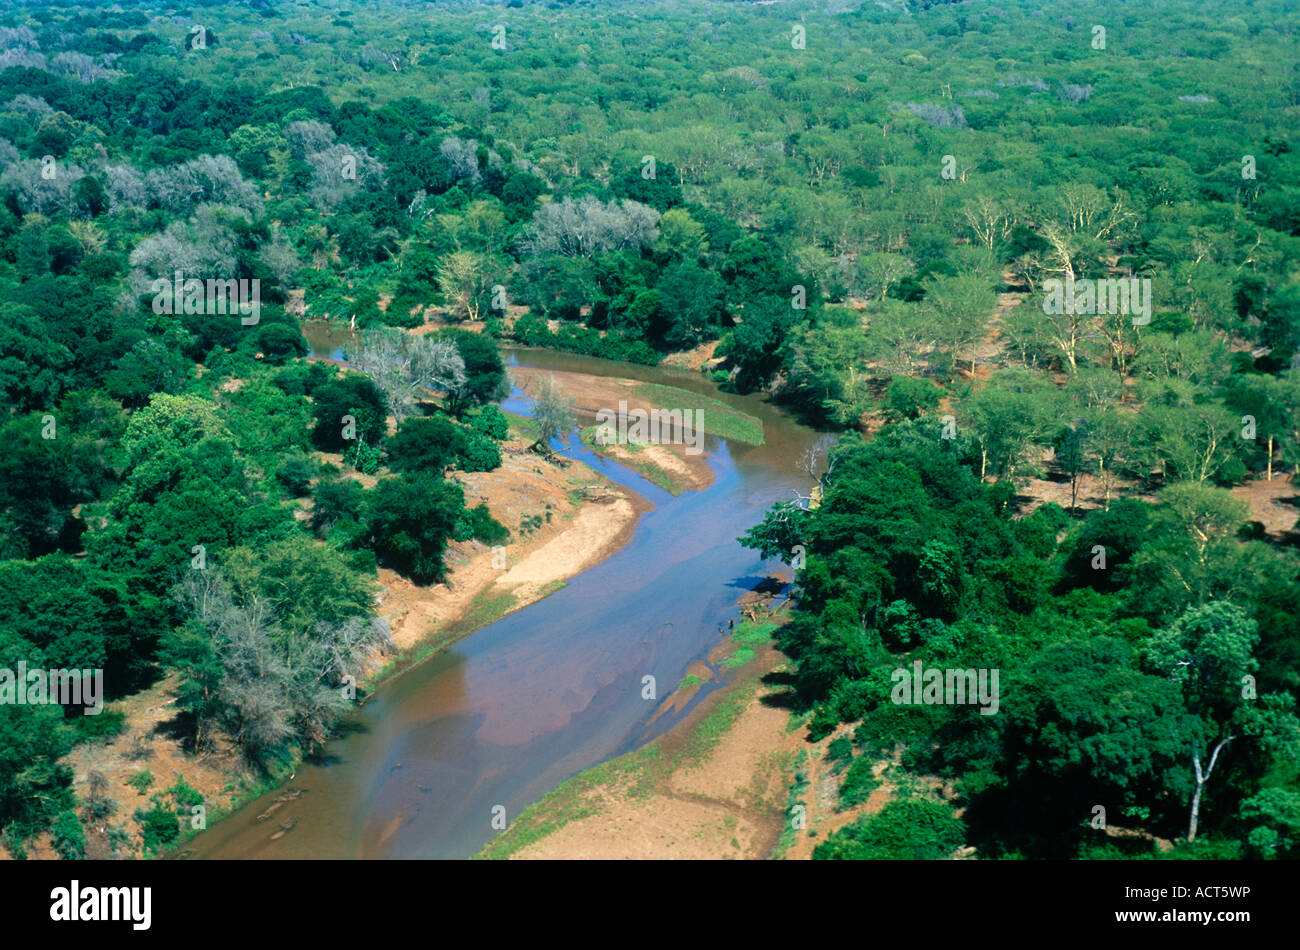 Aerial scenic view of Levuvhu River in the Pafuri area Kruger National Park South Africa Stock Photo